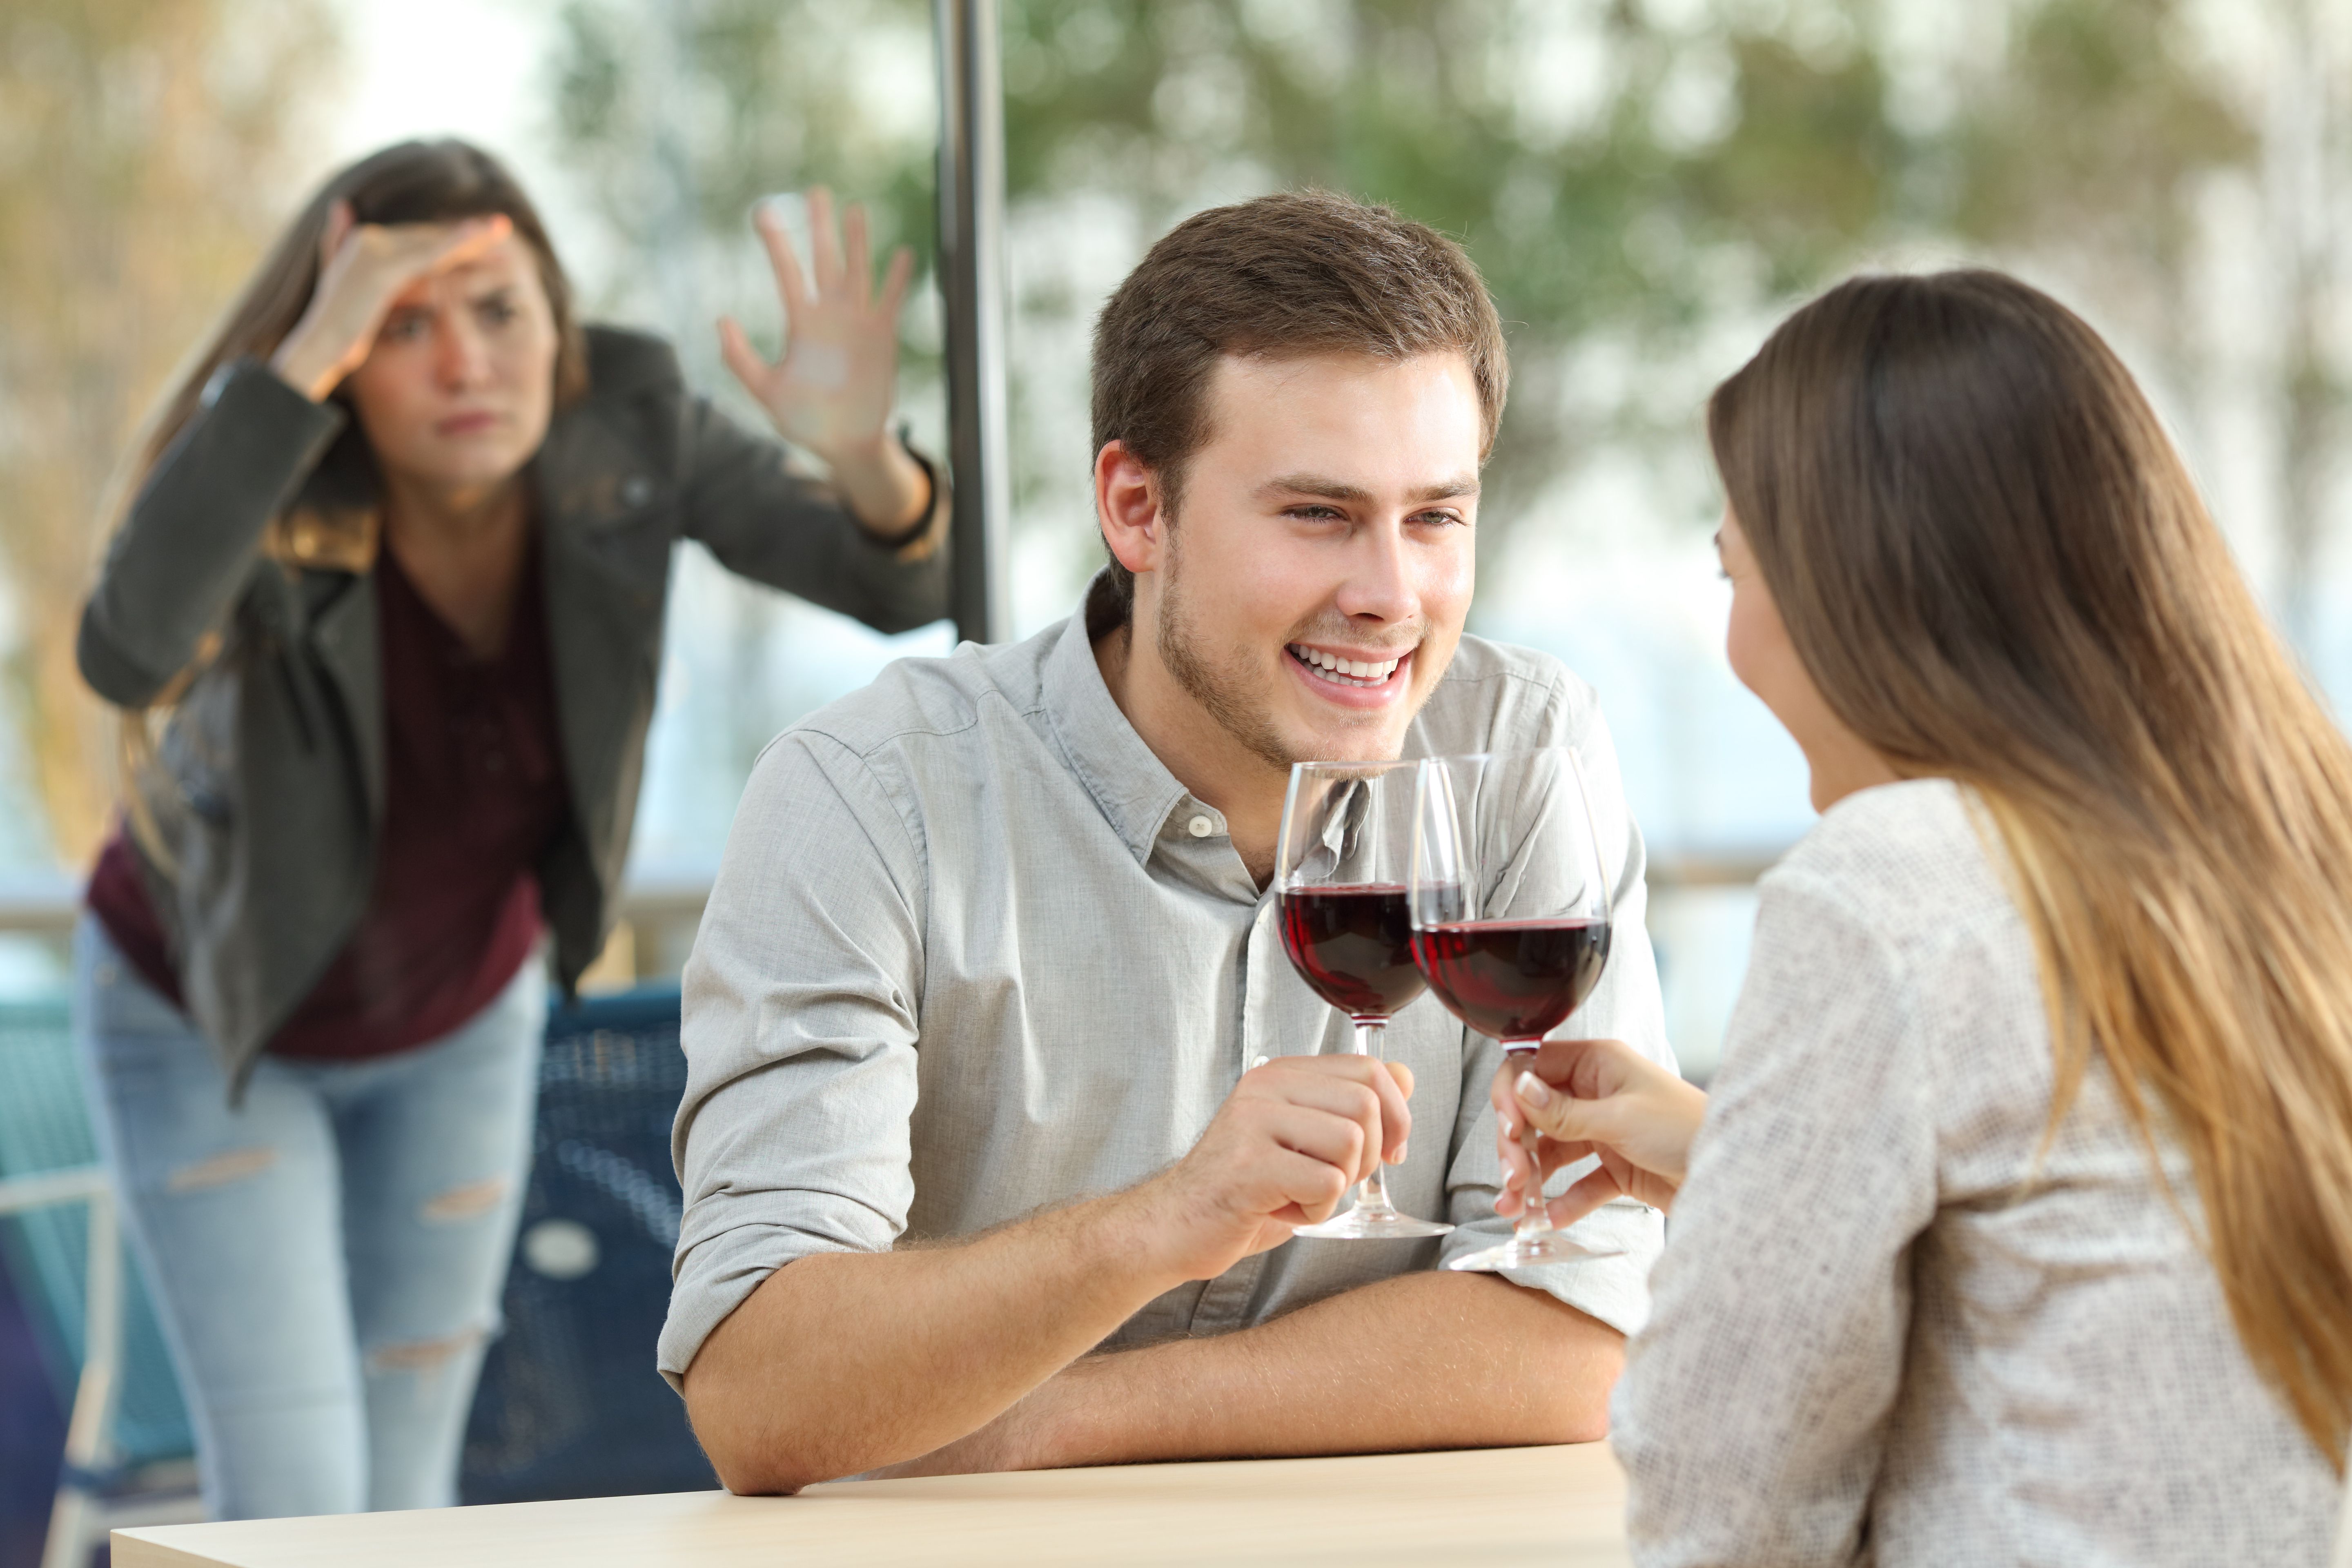 A woman peeping on a glass window at a couple having wine | Source: Shutterstock